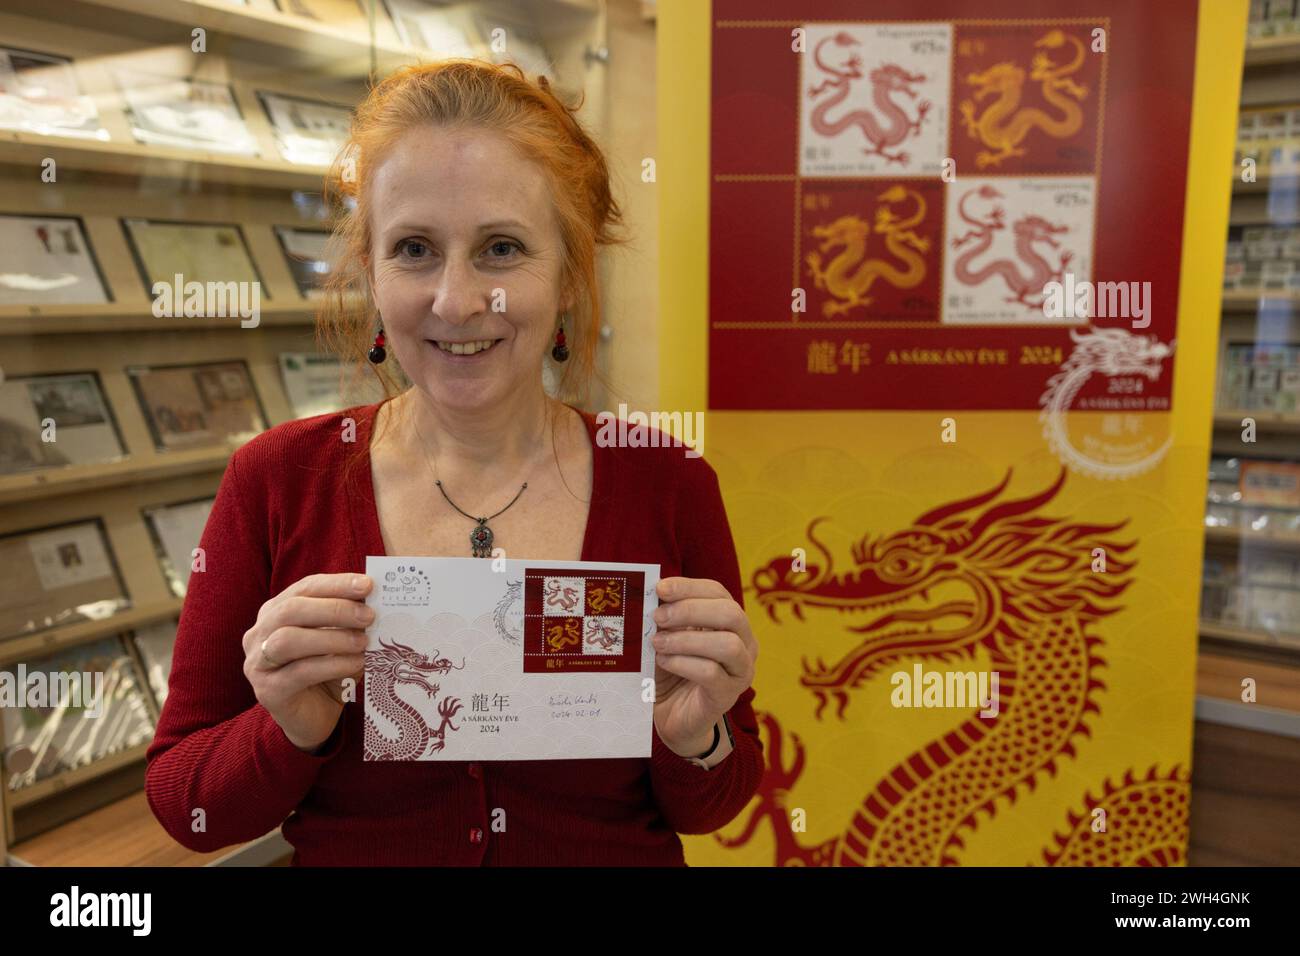 Budapest, Hungary. 7th Feb, 2024. Katalin Bodi, the Hungarian designer of the Year of the Dragon commemorative stamp recently issued by the Hungarian Post, shows a first-day cover with the stamps of the Year of the Dragon in Budapest, Hungary, on Feb. 7, 2024. Katalin Bodi said she hoped her work could help deepen the connection between Hungary and China. Credit: Attila Volgyi/Xinhua/Alamy Live News Stock Photo